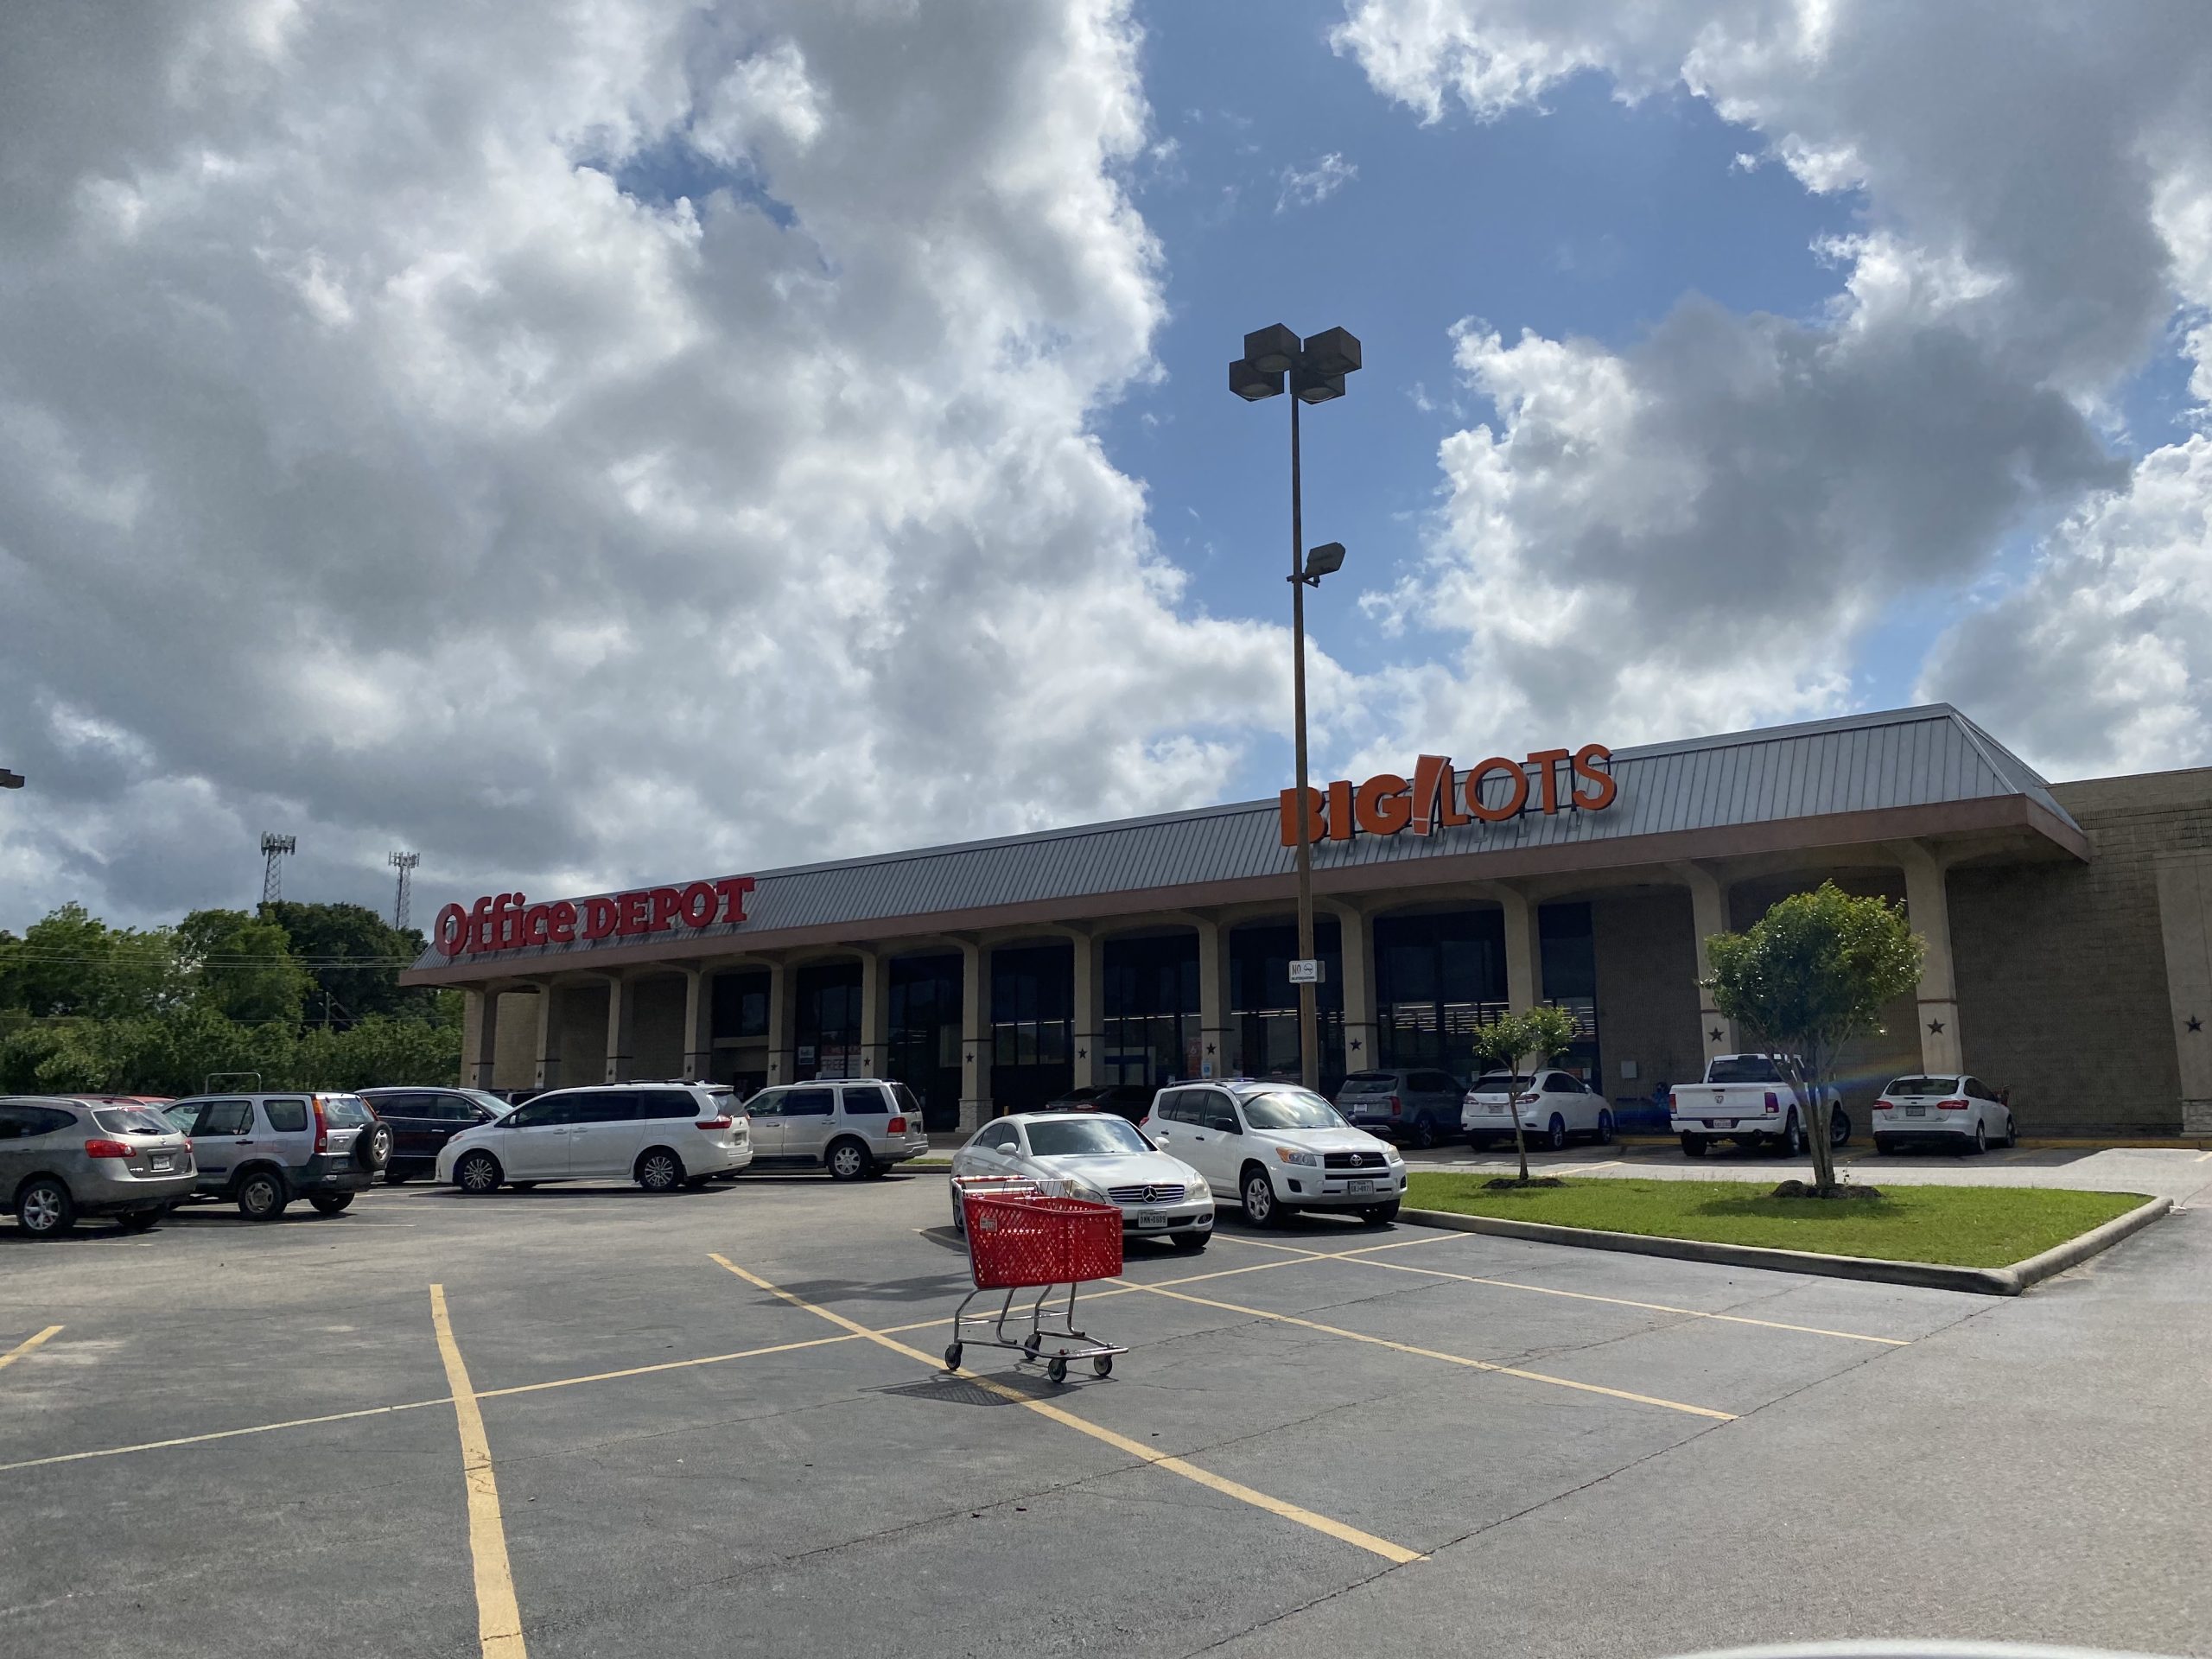 A former Safeway with a split personality – Houston Historic Retail